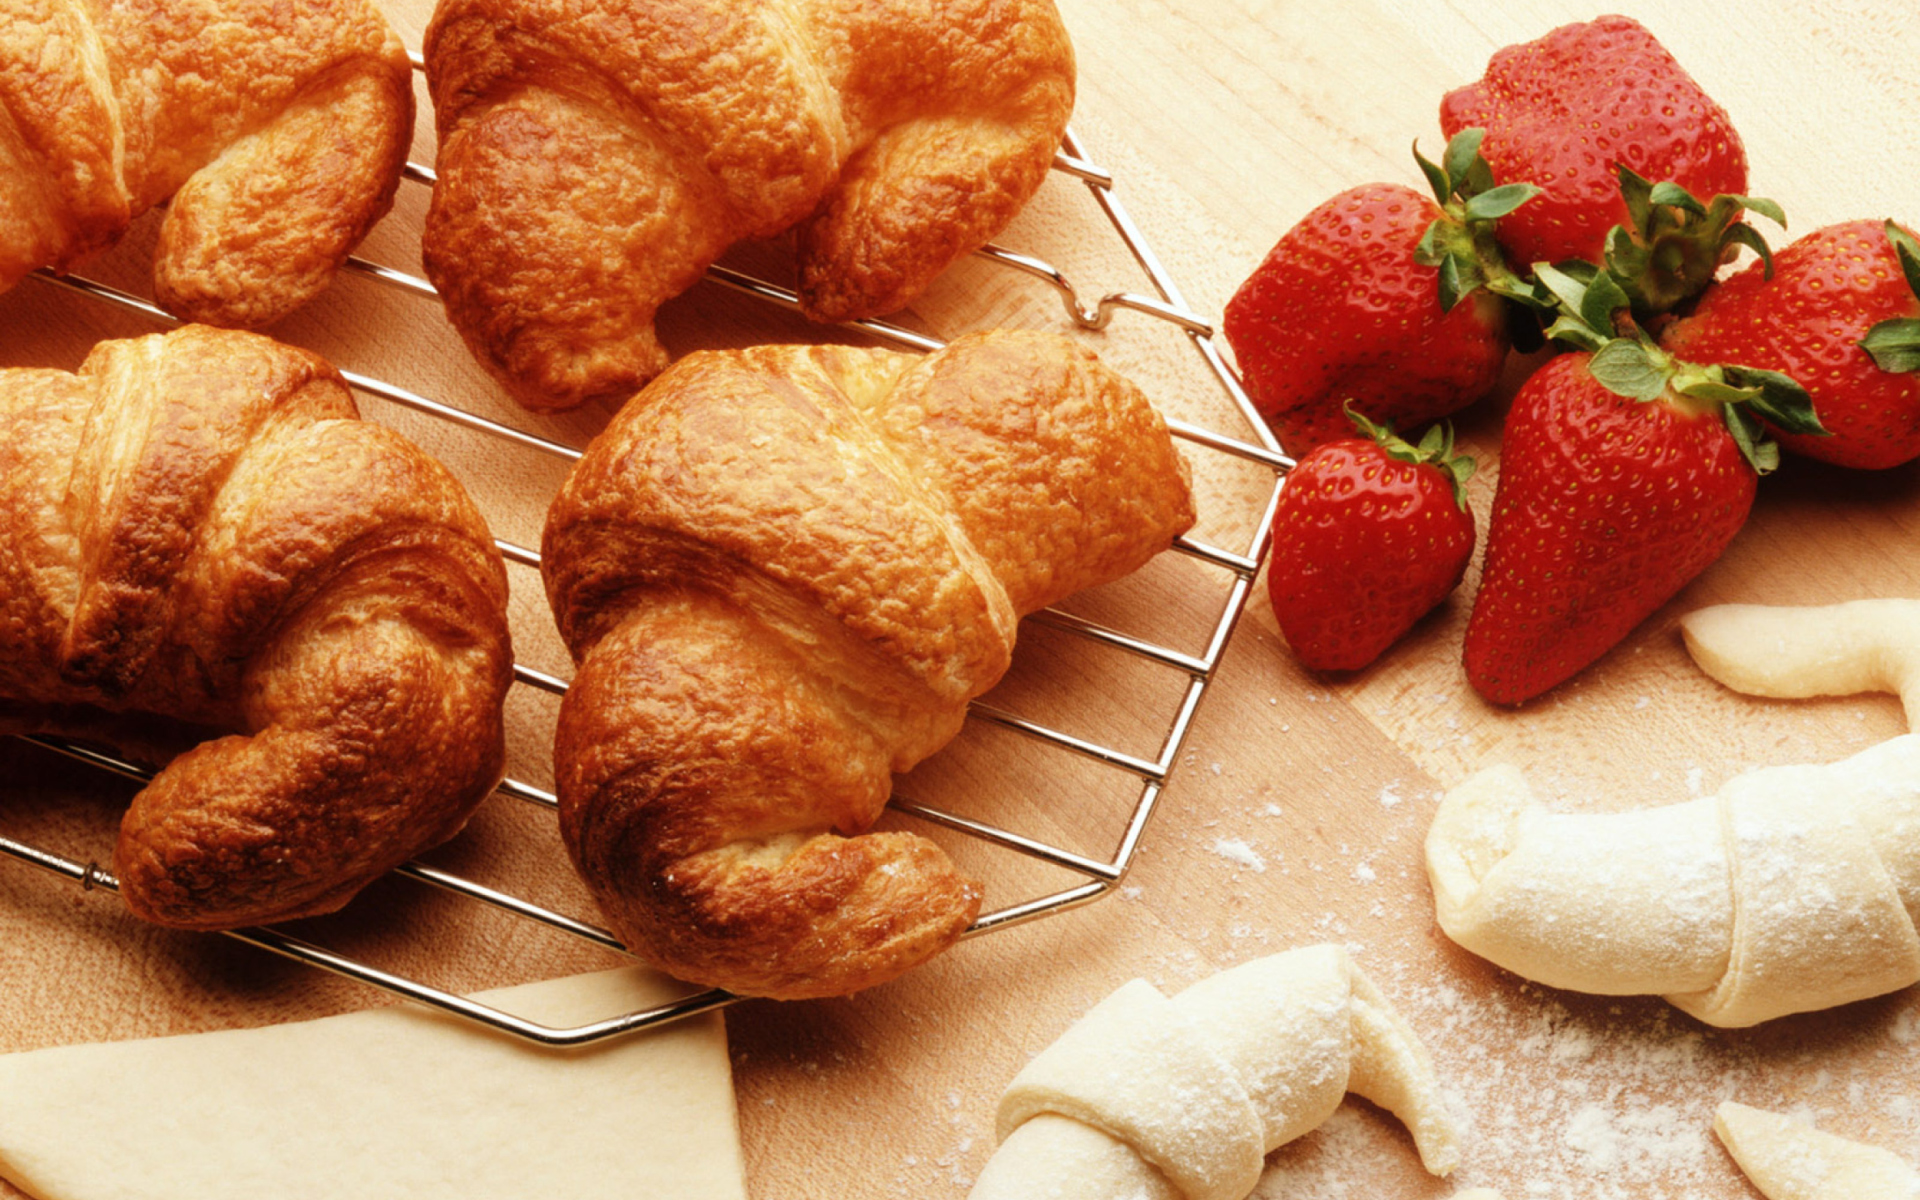 Croissants And Strawberries wallpaper 1920x1200